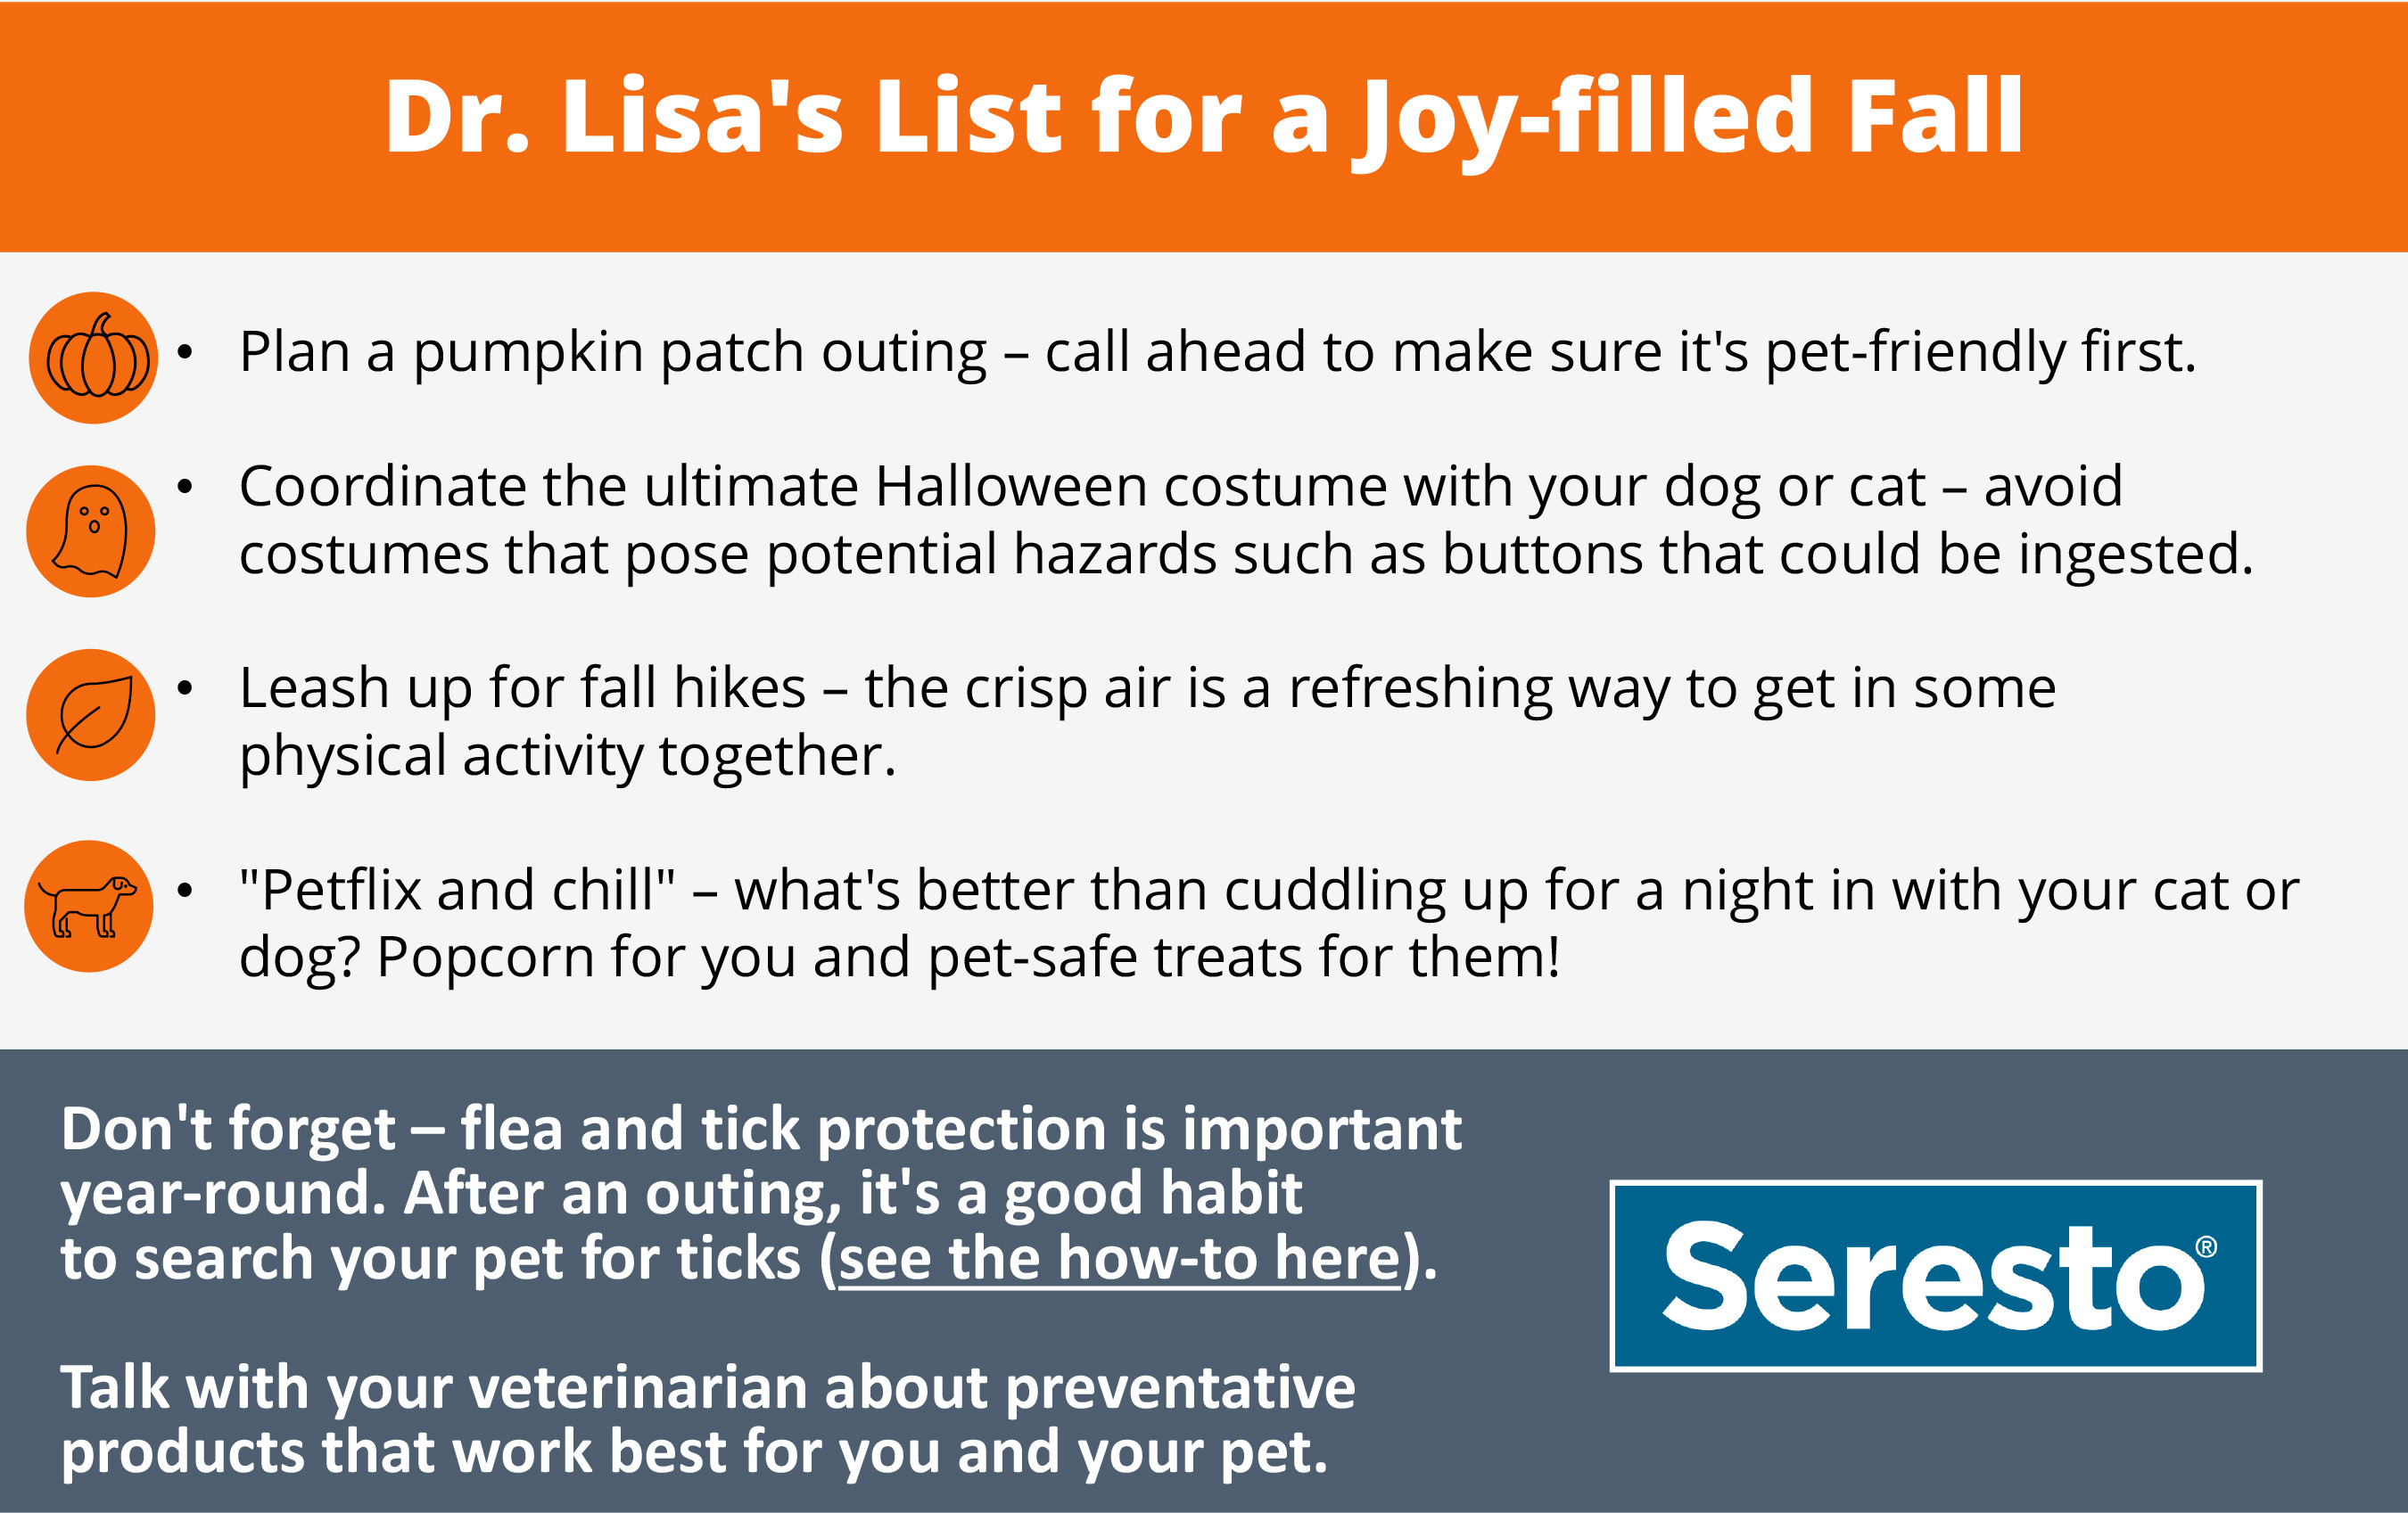 With protection in place, it’s time to enjoy the best of the fall season together with your cat or dog. Dr. Lippman shares her list for a joy-filled fall with your pet.